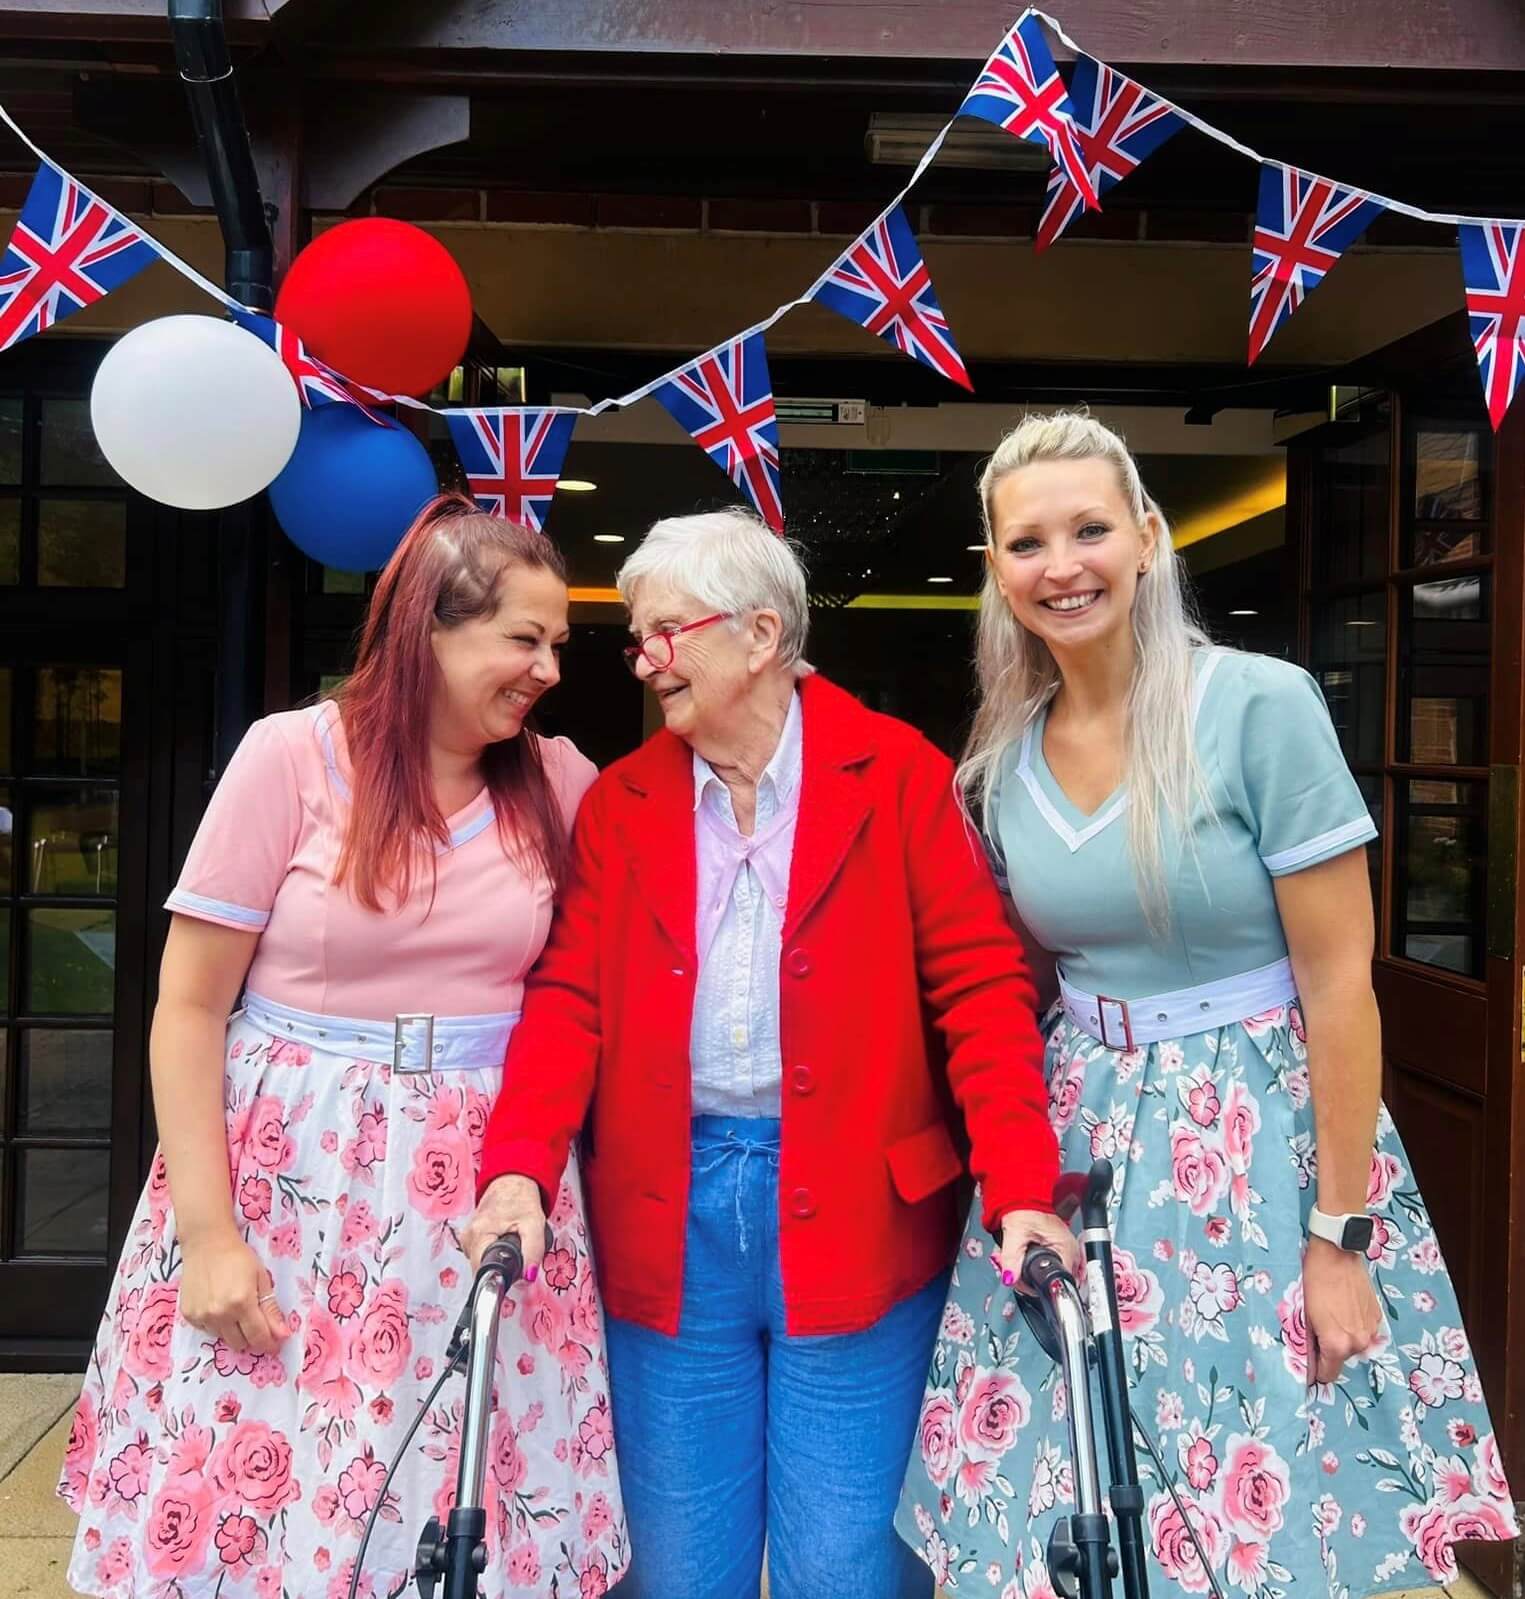 D-Day celebrations in full swing at Sway Place